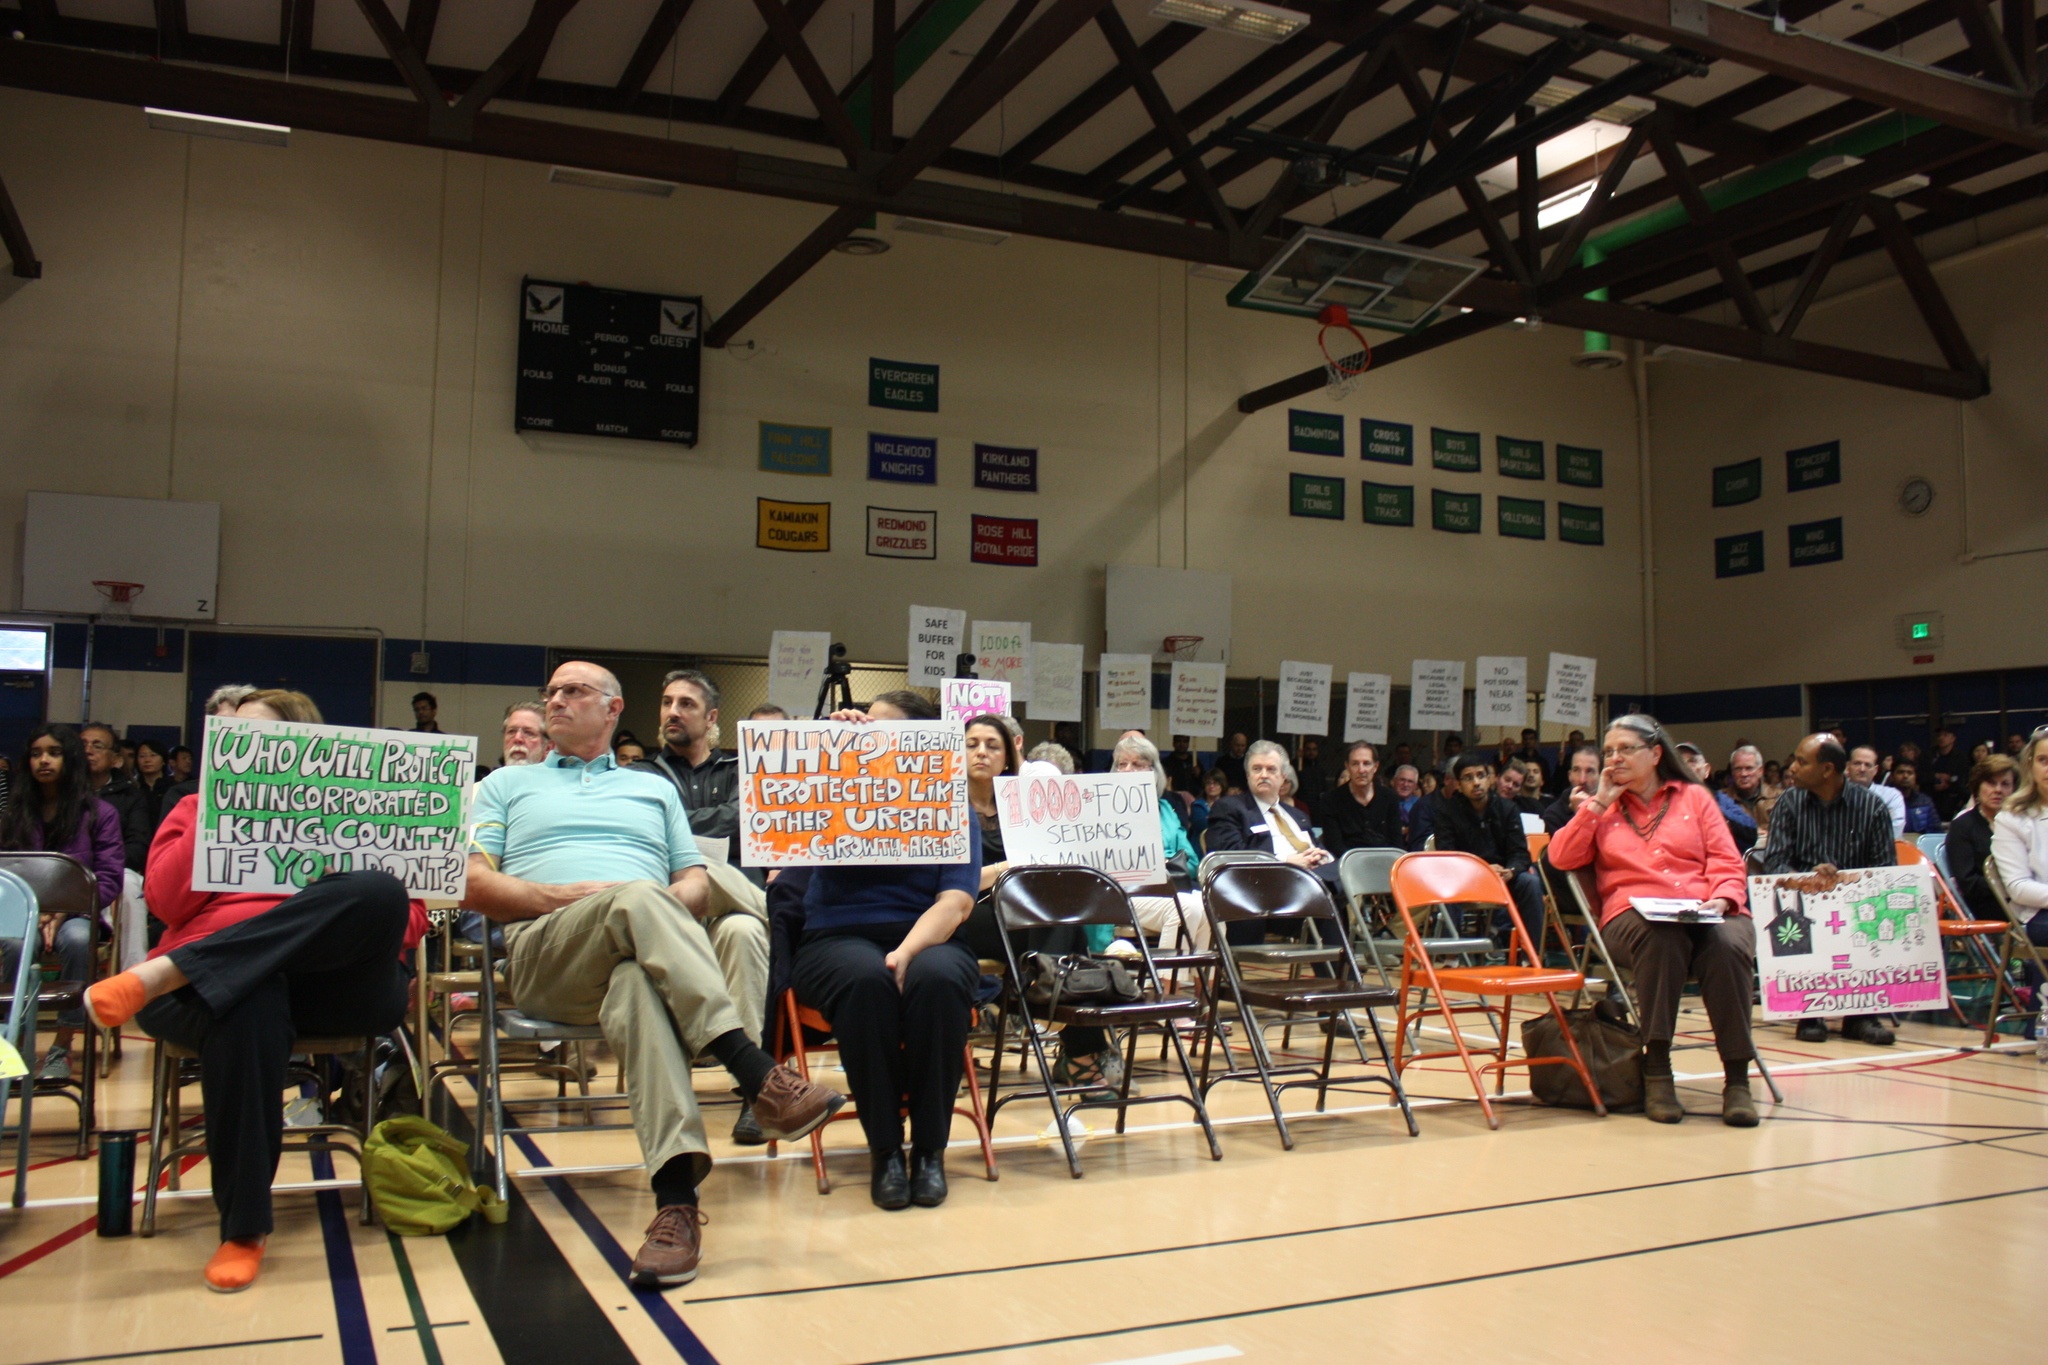 Redmond Ridge residents at a King County town hall hold signs protesting marijuana processing plants in their community. Samantha Pak